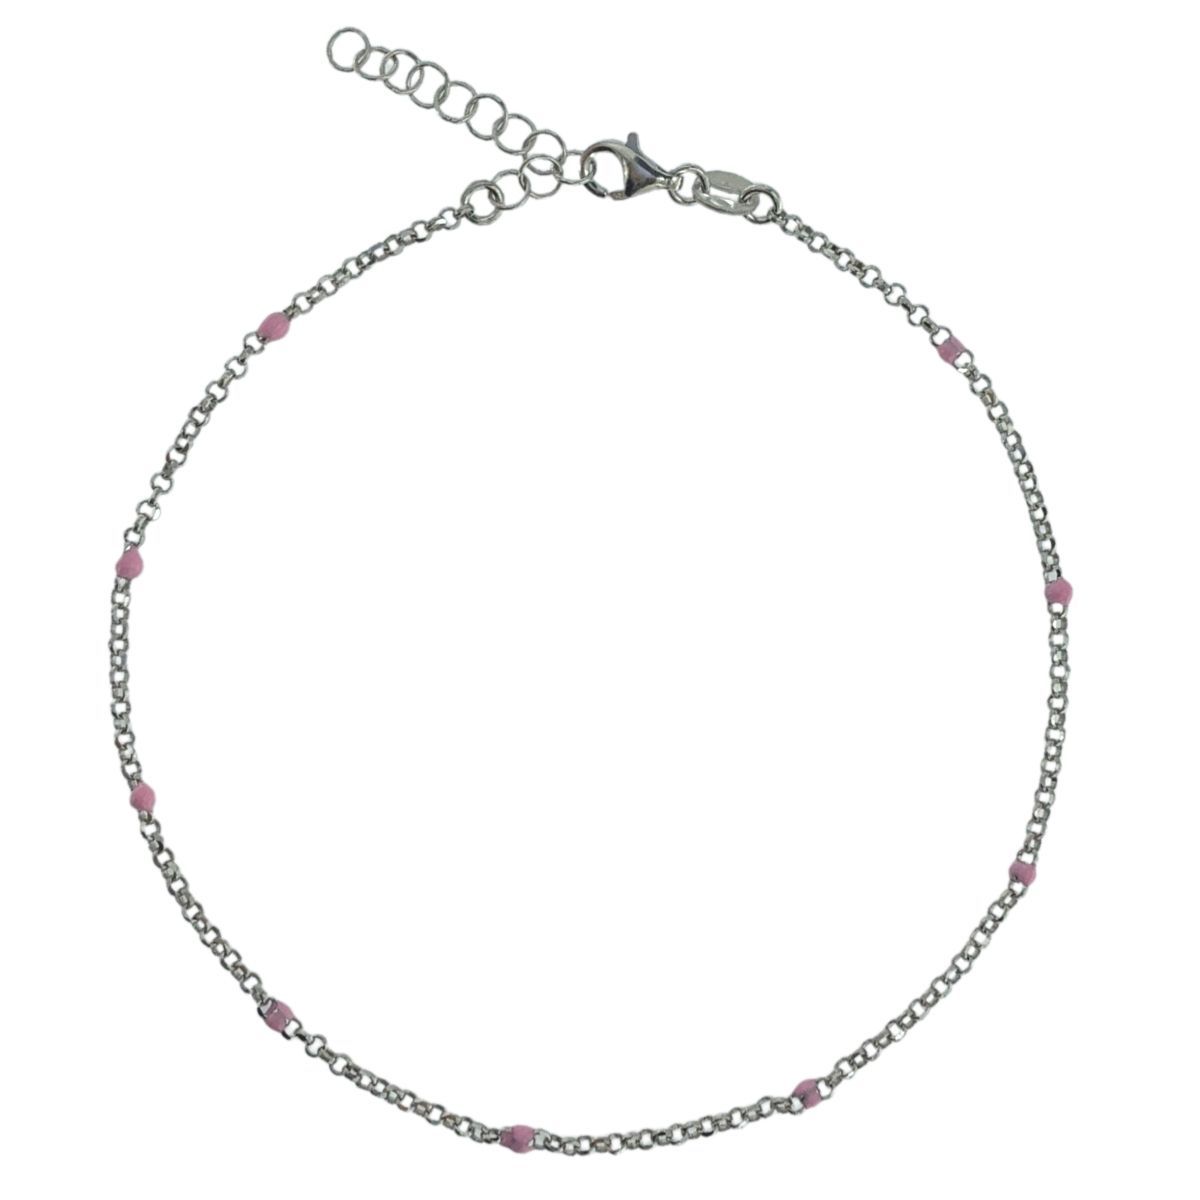 SILVER ANKLET WITH PINK BALLS